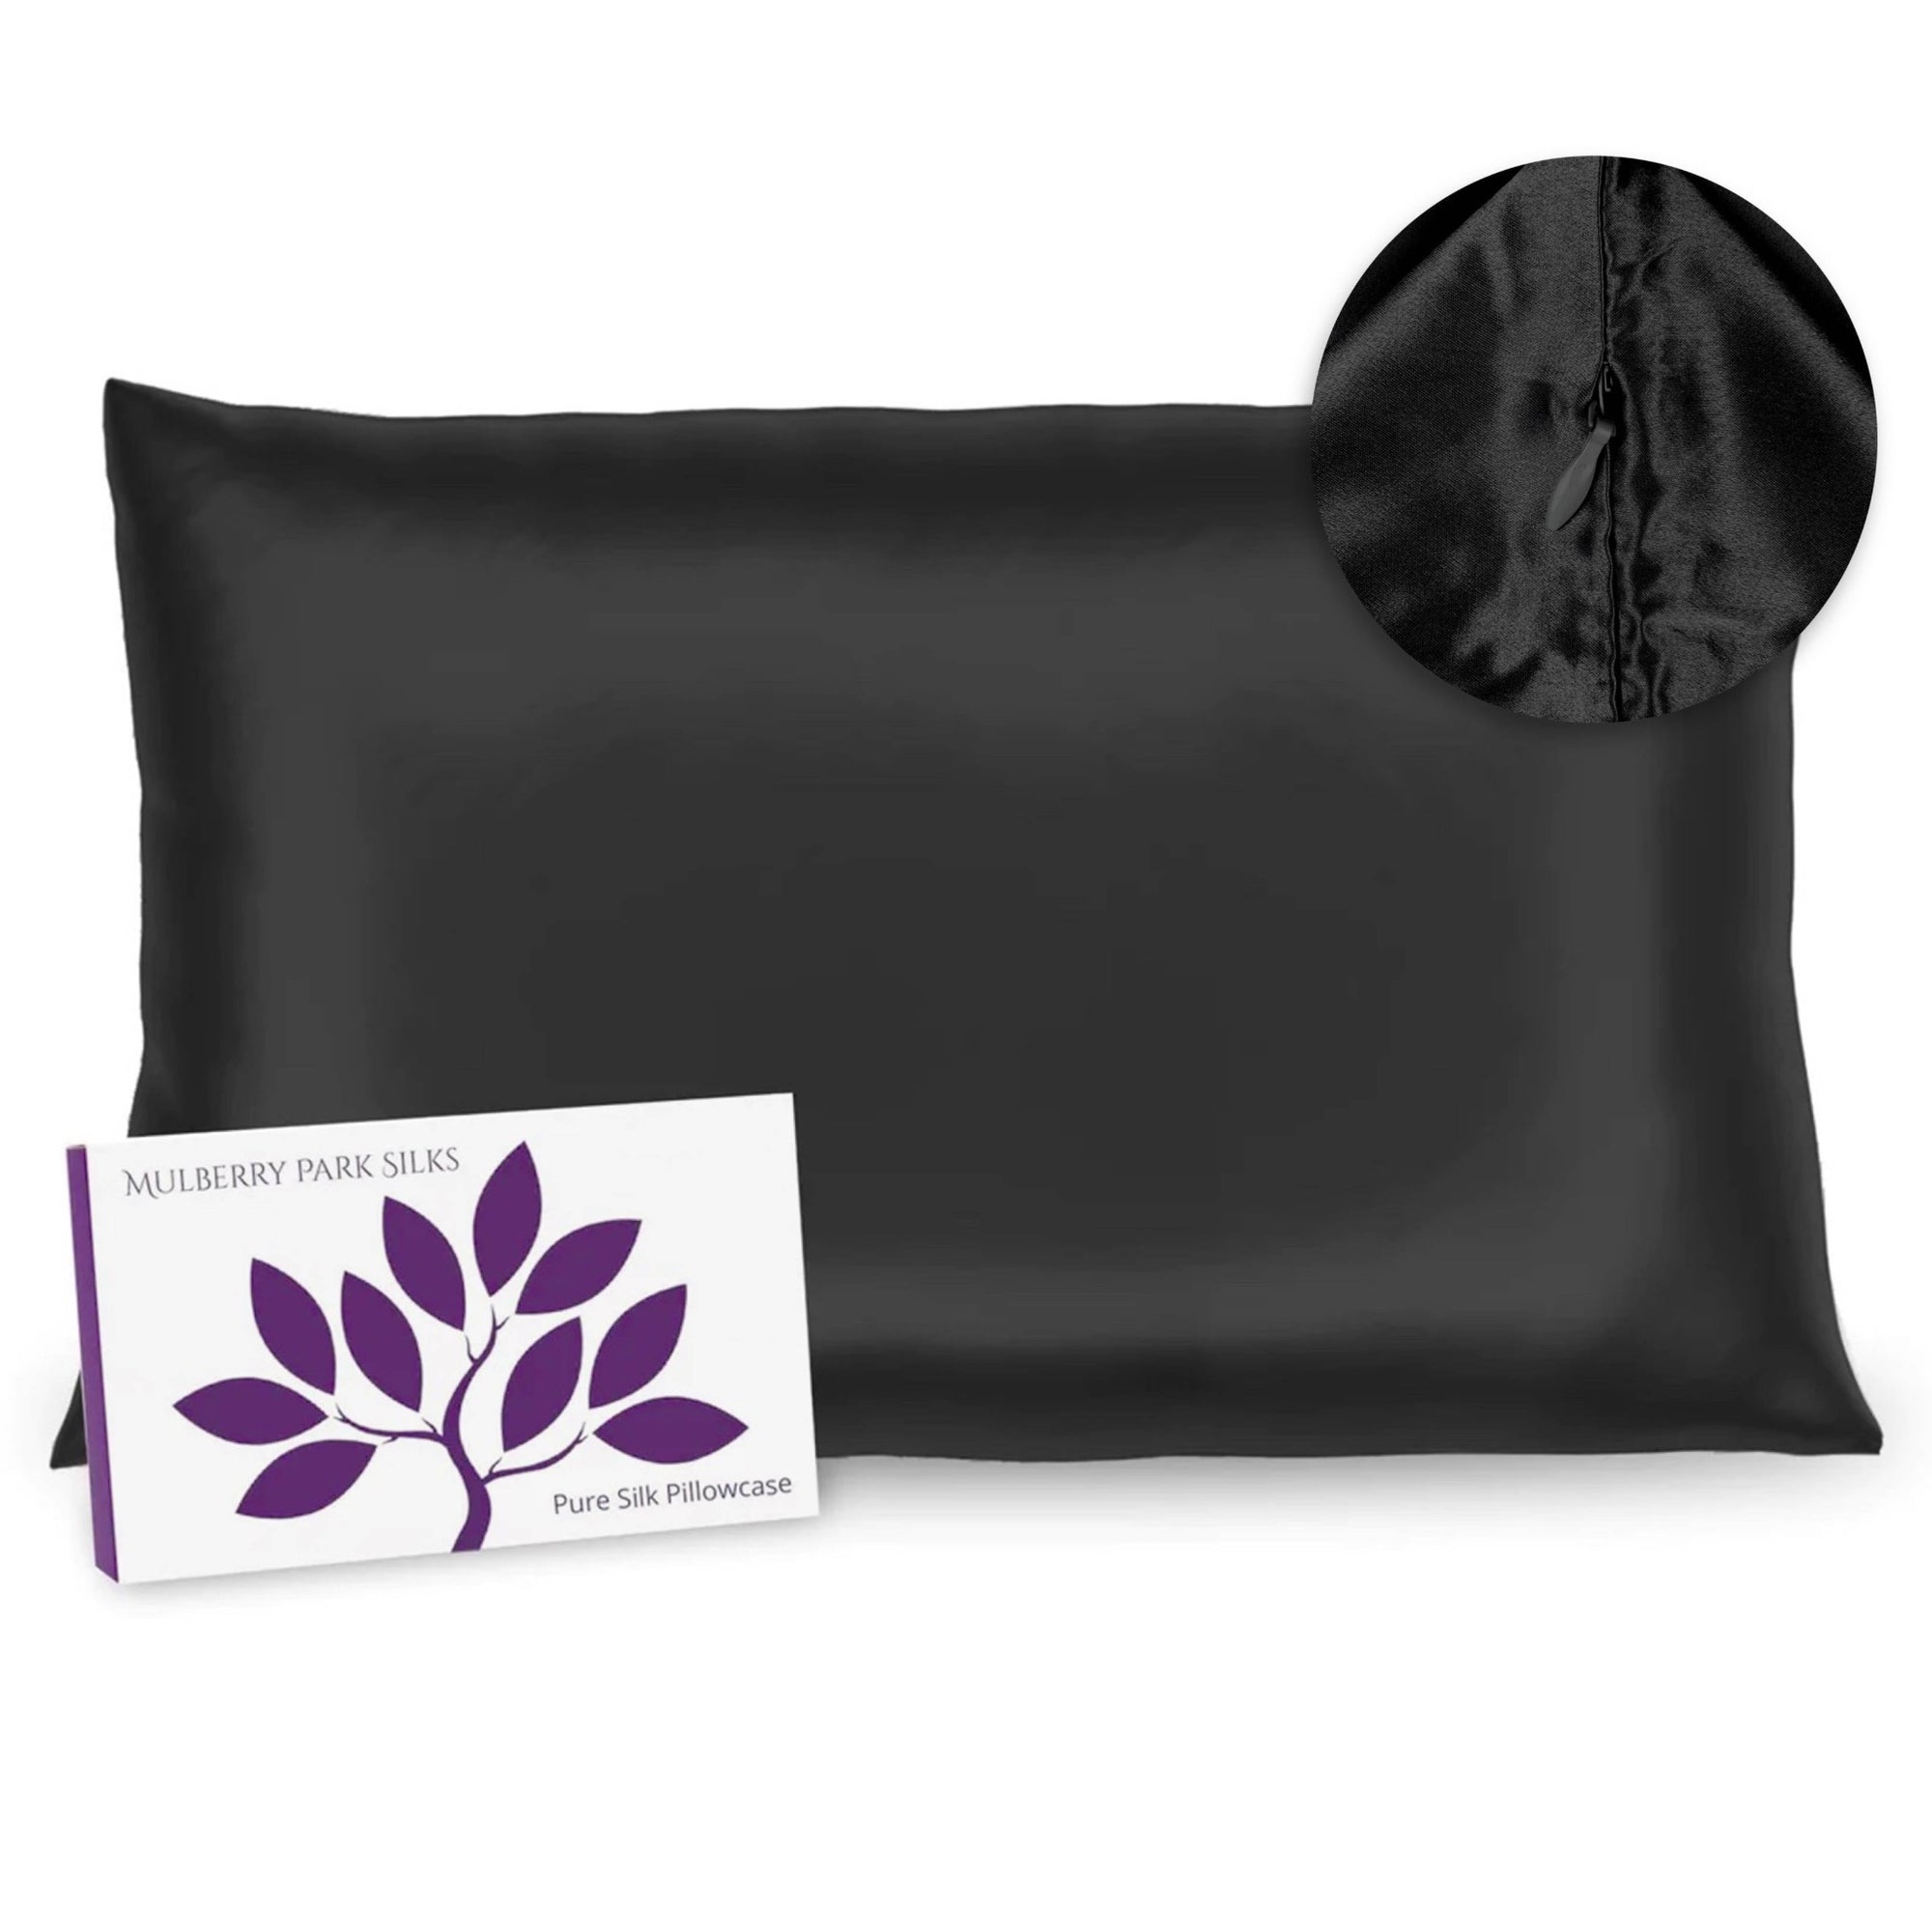 Mulberry Park Silks Deluxe 19 Momme Pure Silk Pillowcase in Black Color with Box